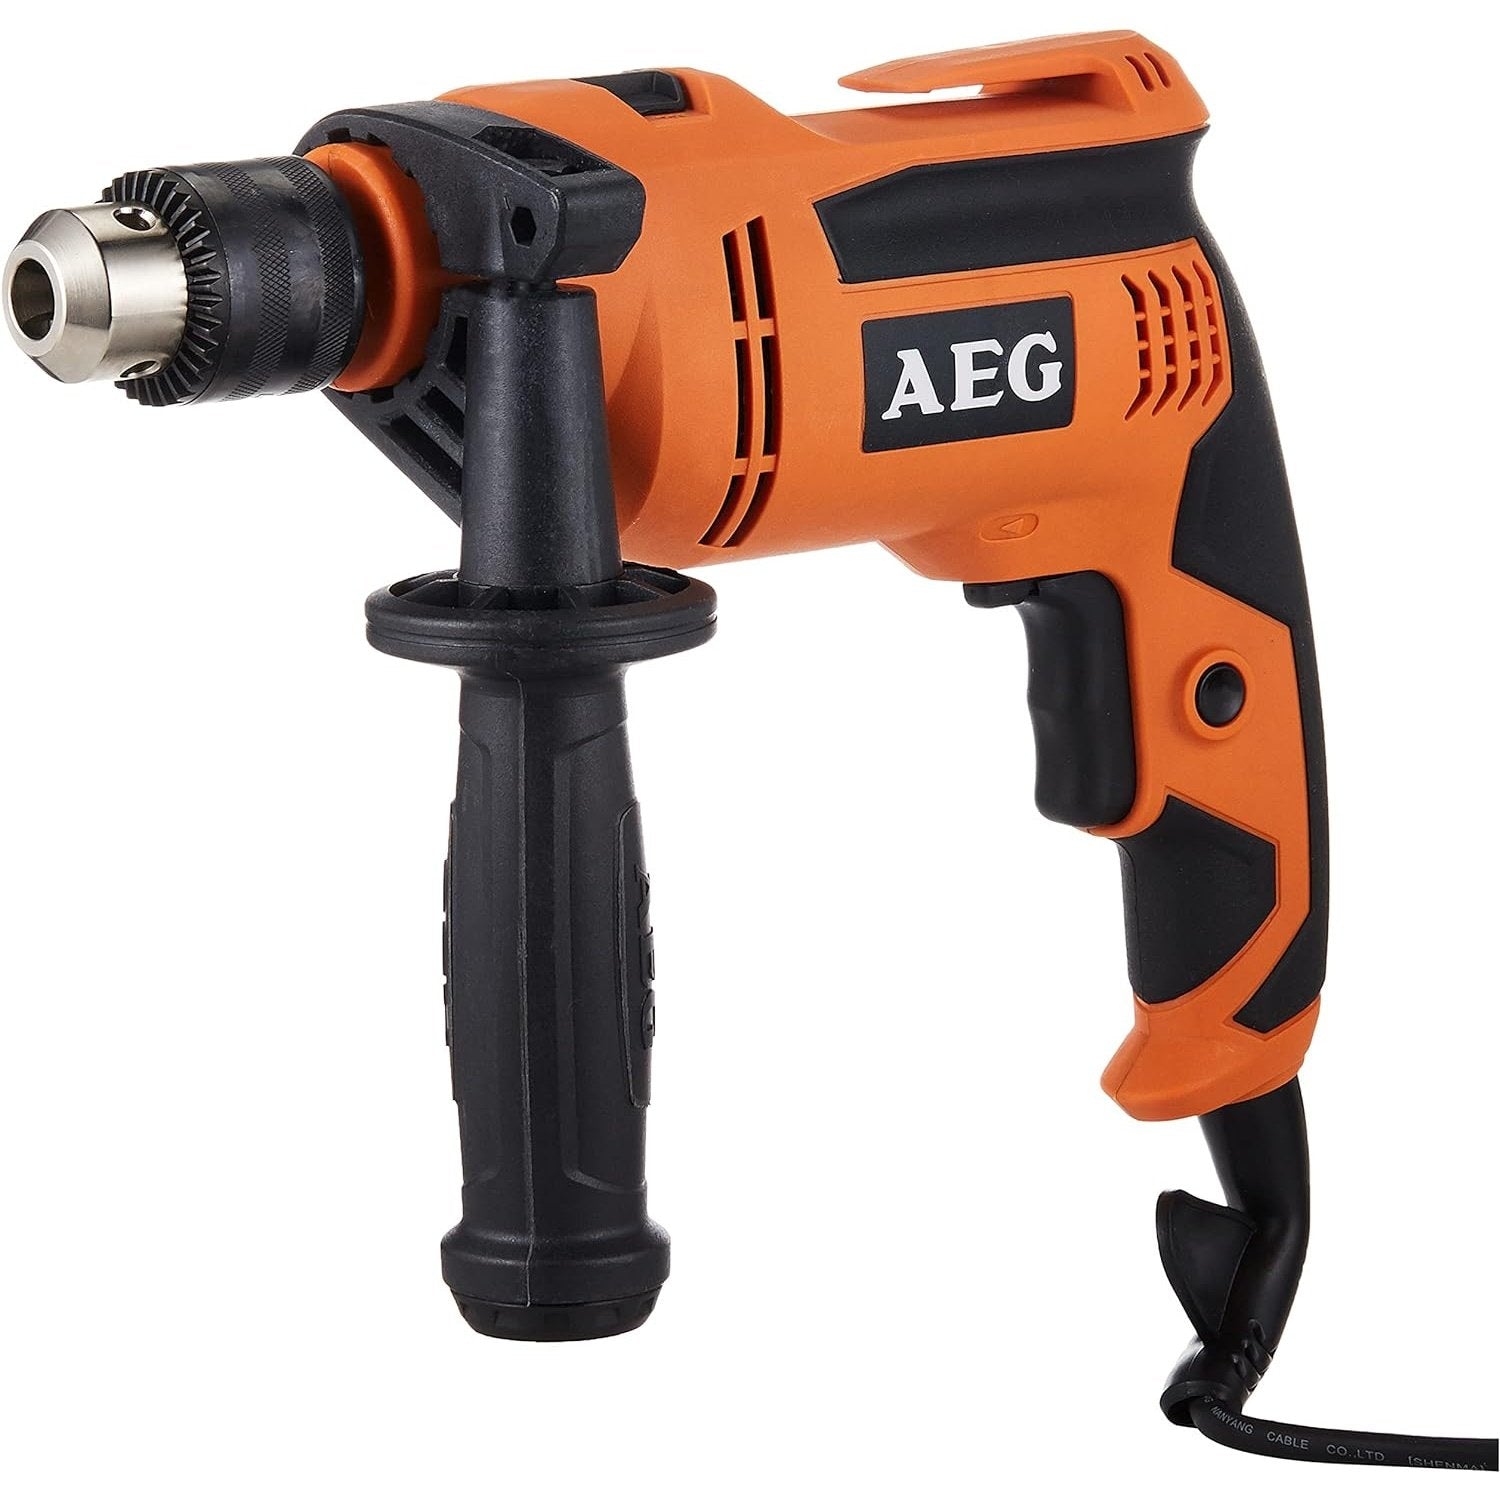 AEG Percussion Drill 13mm 580W - SBE580R | Supply Master Accra, Ghana Drill Buy Tools hardware Building materials